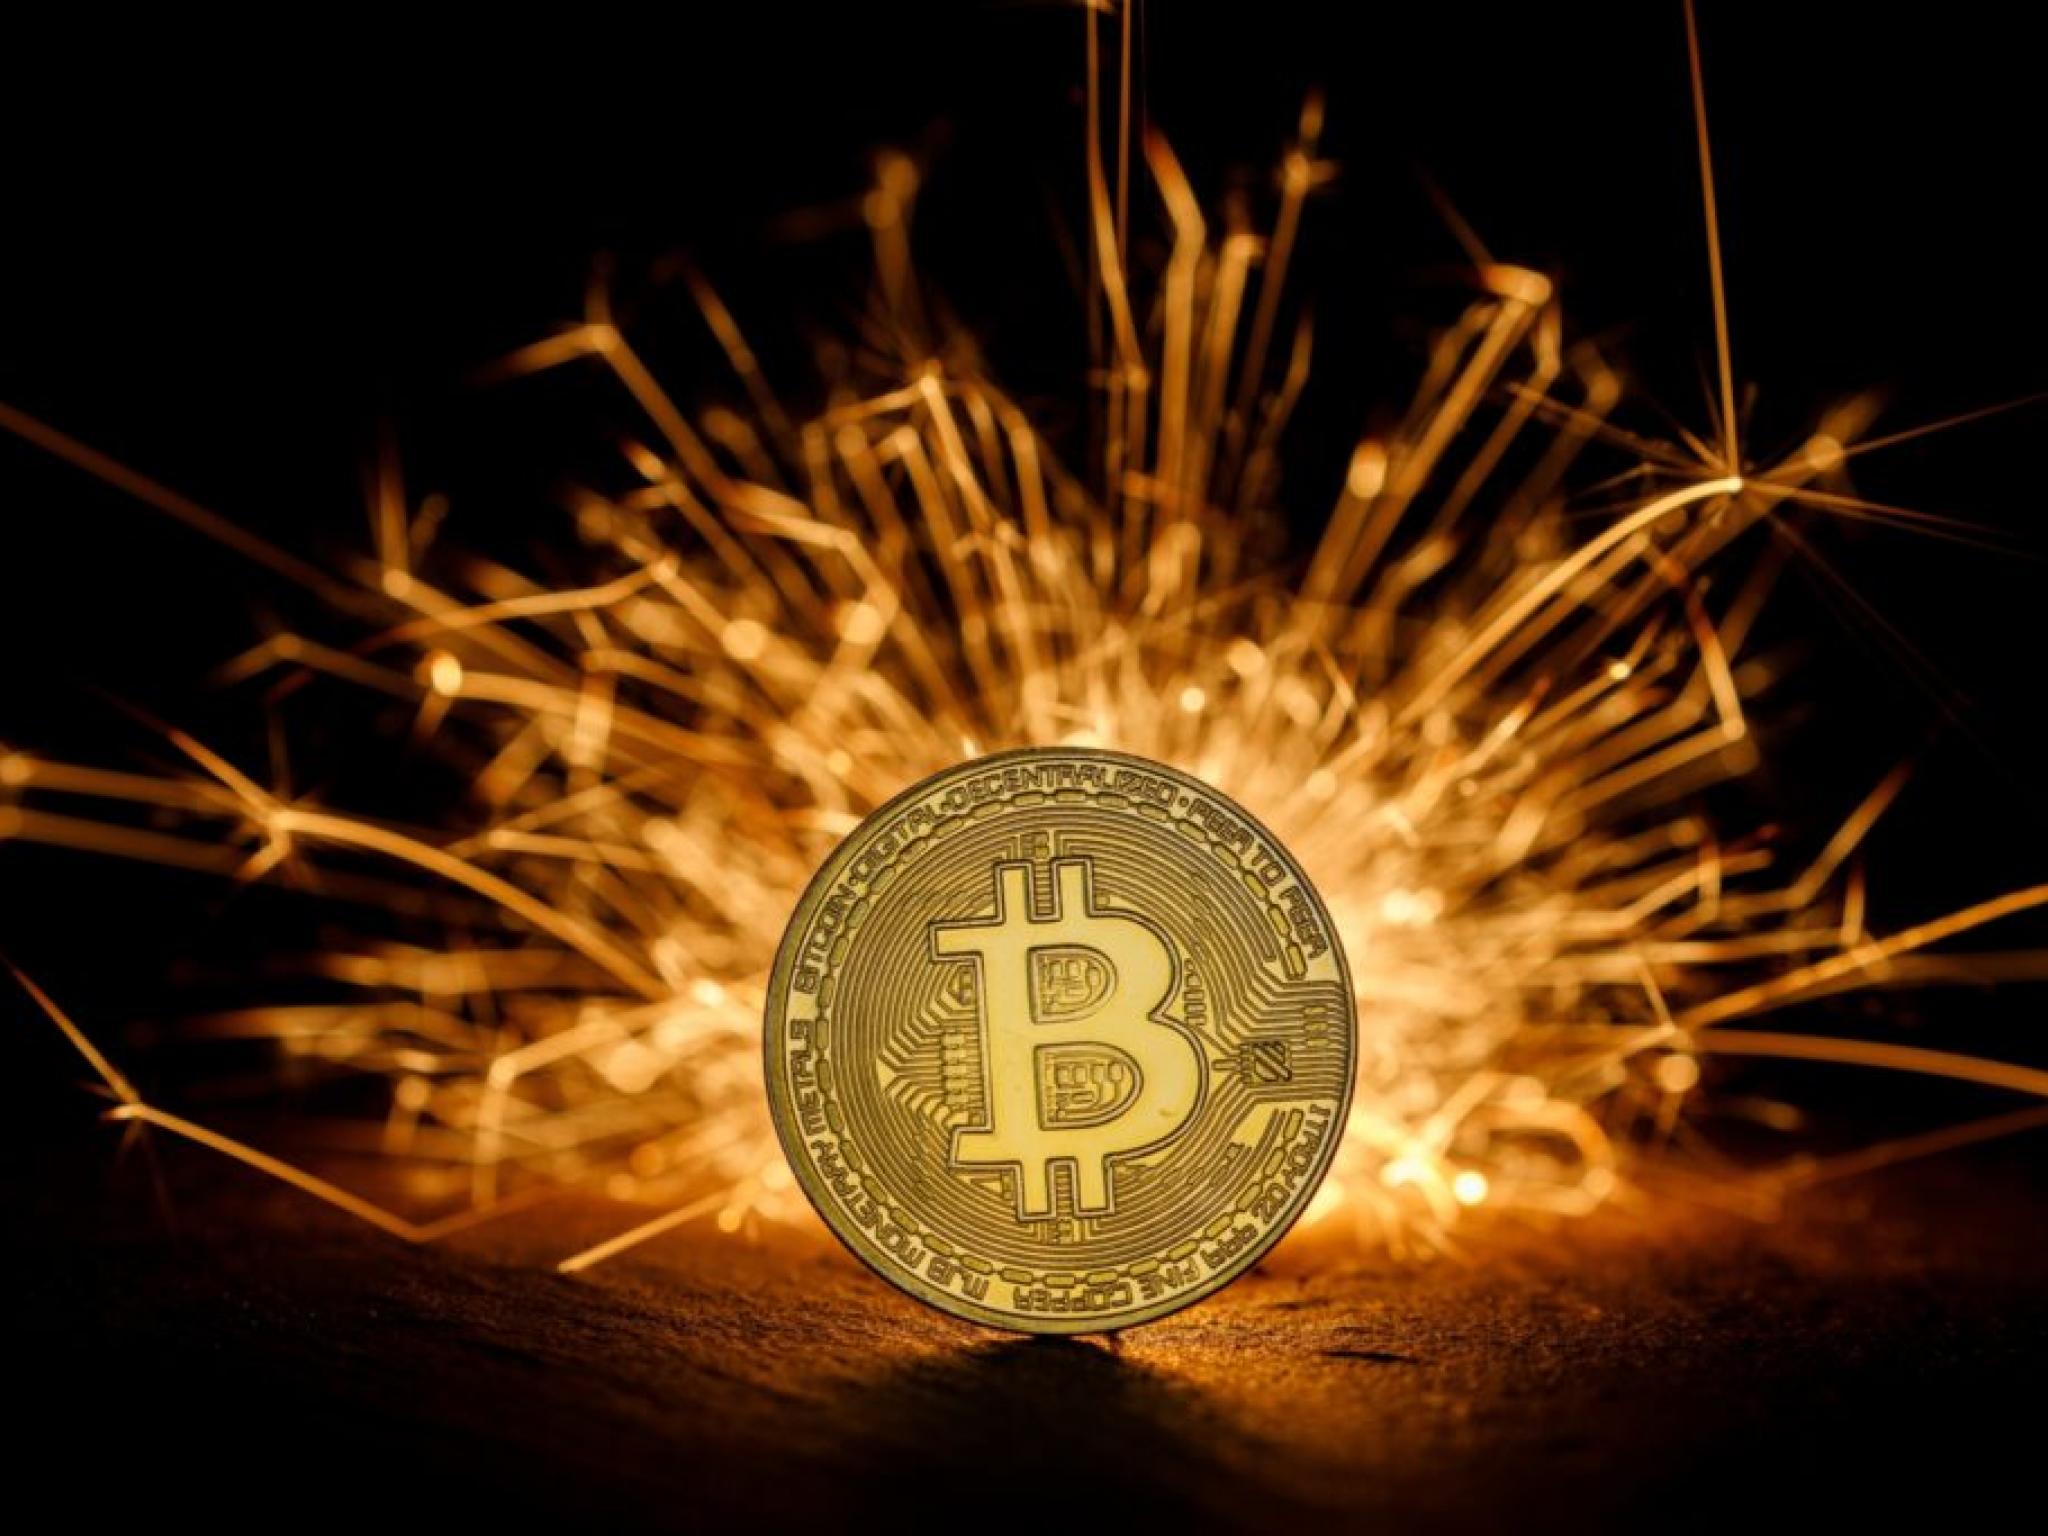  bitcoin-to-hit-1-million-by-2033-microstrategys-stock-rated-outperform-bernstein 